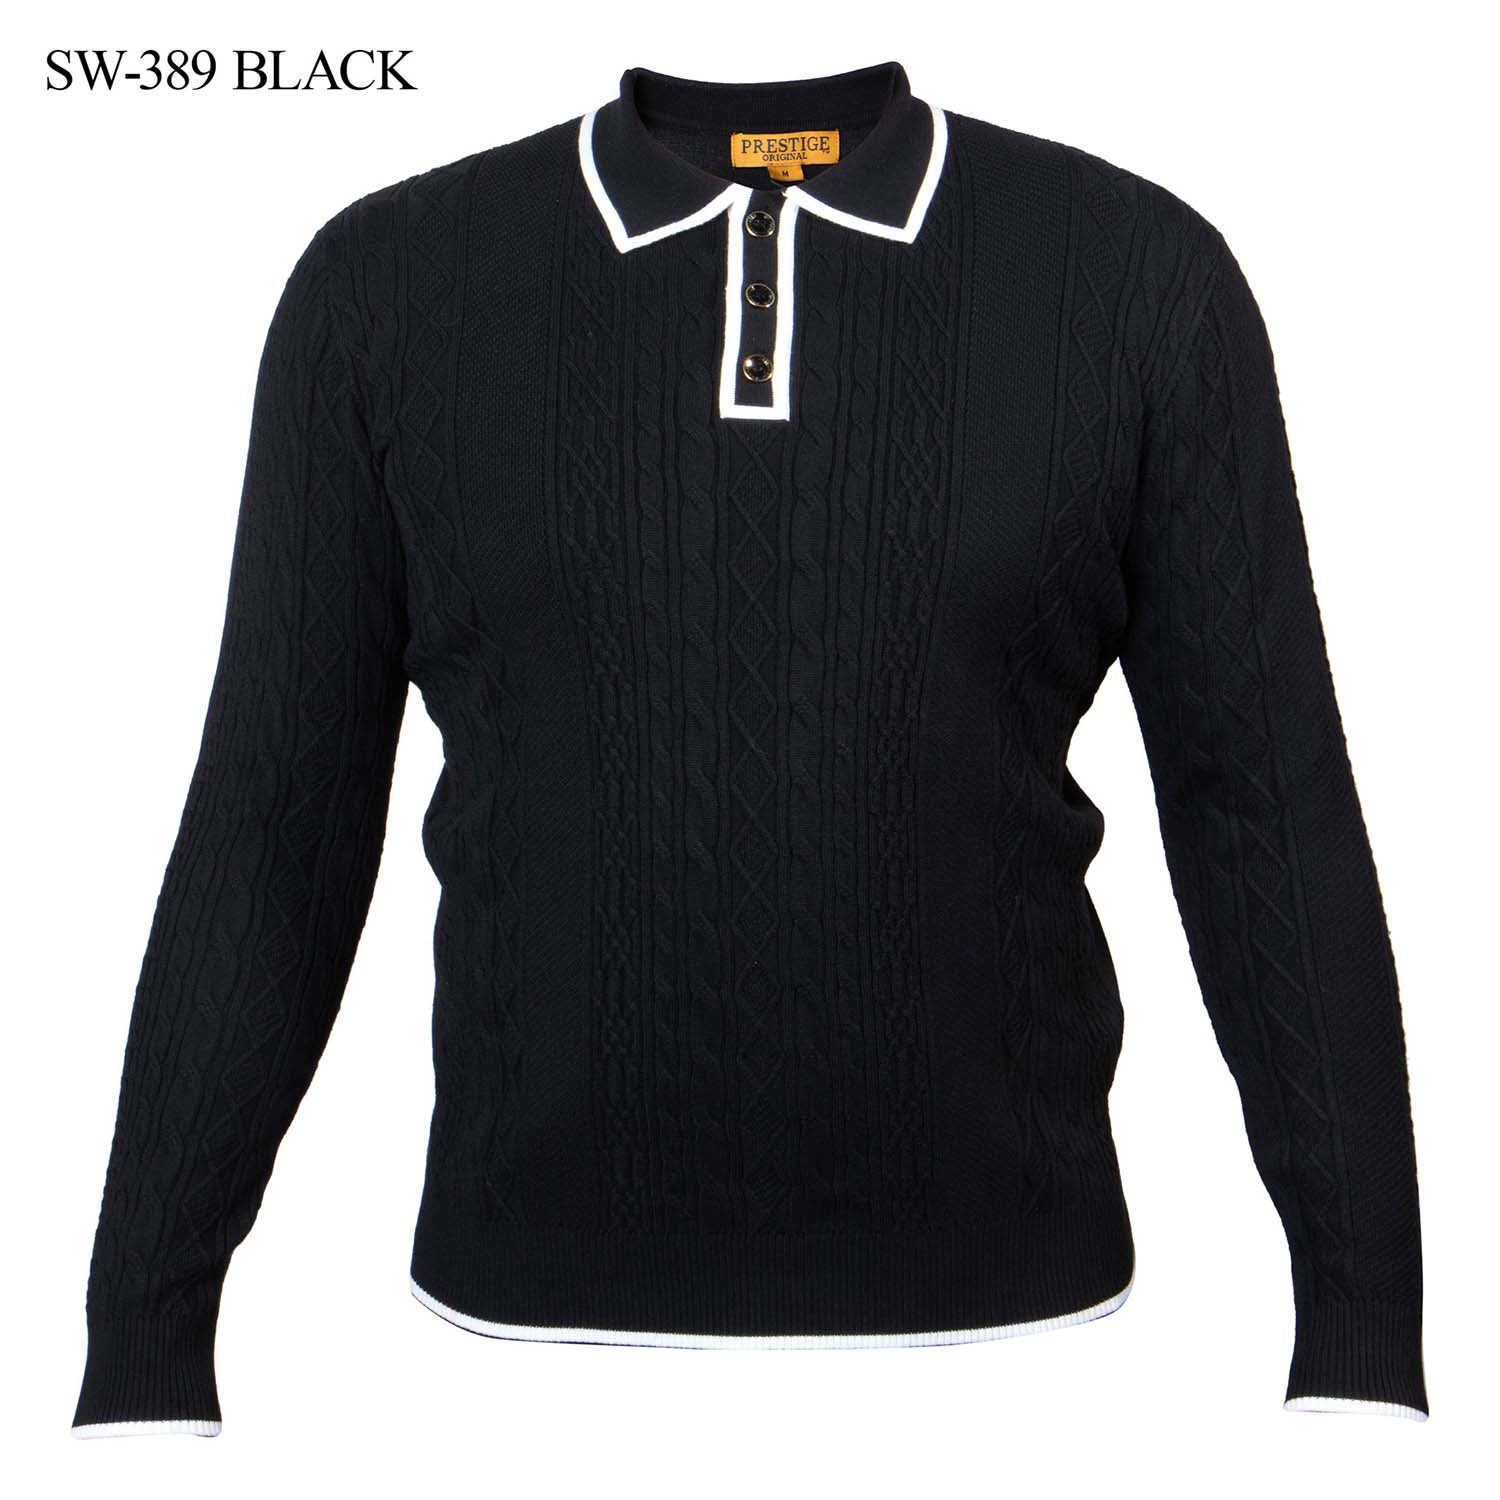 Prestige Highlight Cable Knit Sweater 389